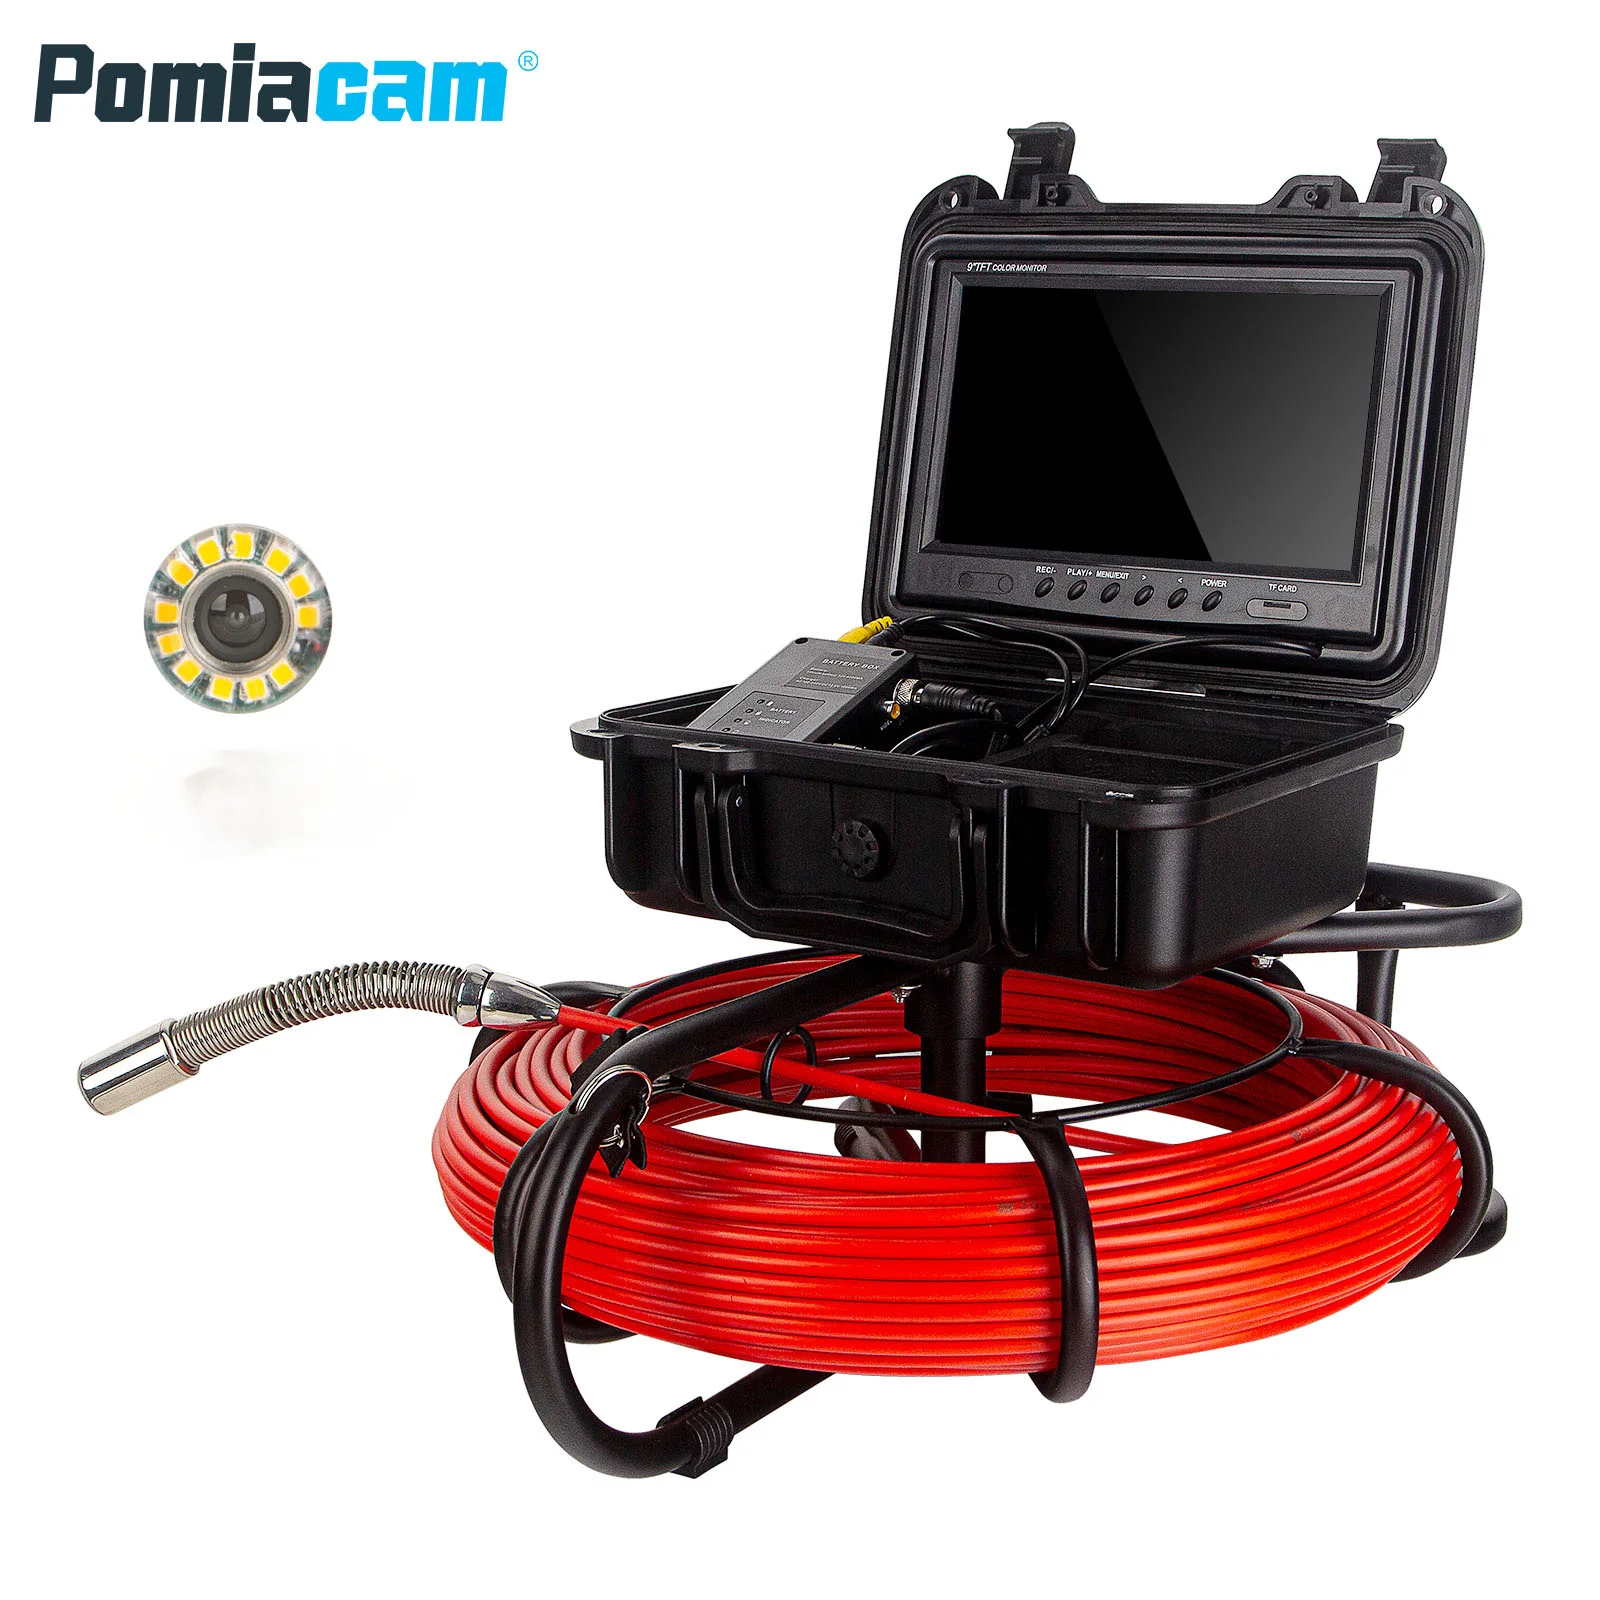 WP9600FD Sewer Camera 100ft Snake Cam DVR Video Pipe Inspection Equipment 9 inch LCD Monitor Duct 1200TVL Borescope Red cable 7mm soft cable short spring 23mm 512hz sonde pipe sewer drain inspection camera endoscope borescope 7 lcd monitor meter counter